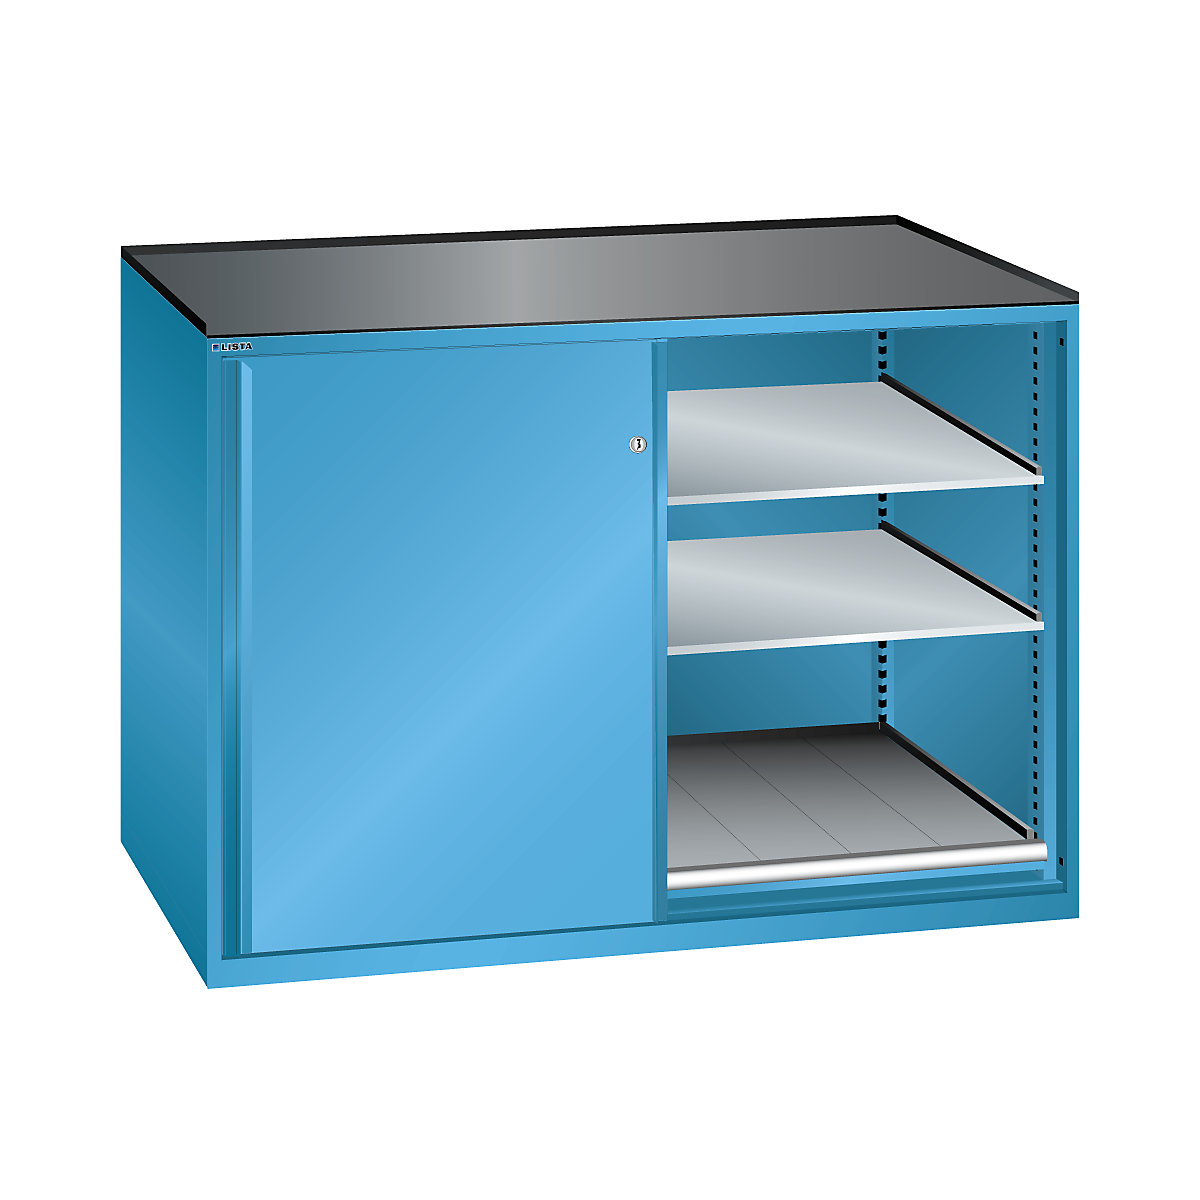 Sliding door cupboard, max. load of pull-out shelf 75 kg - LISTA